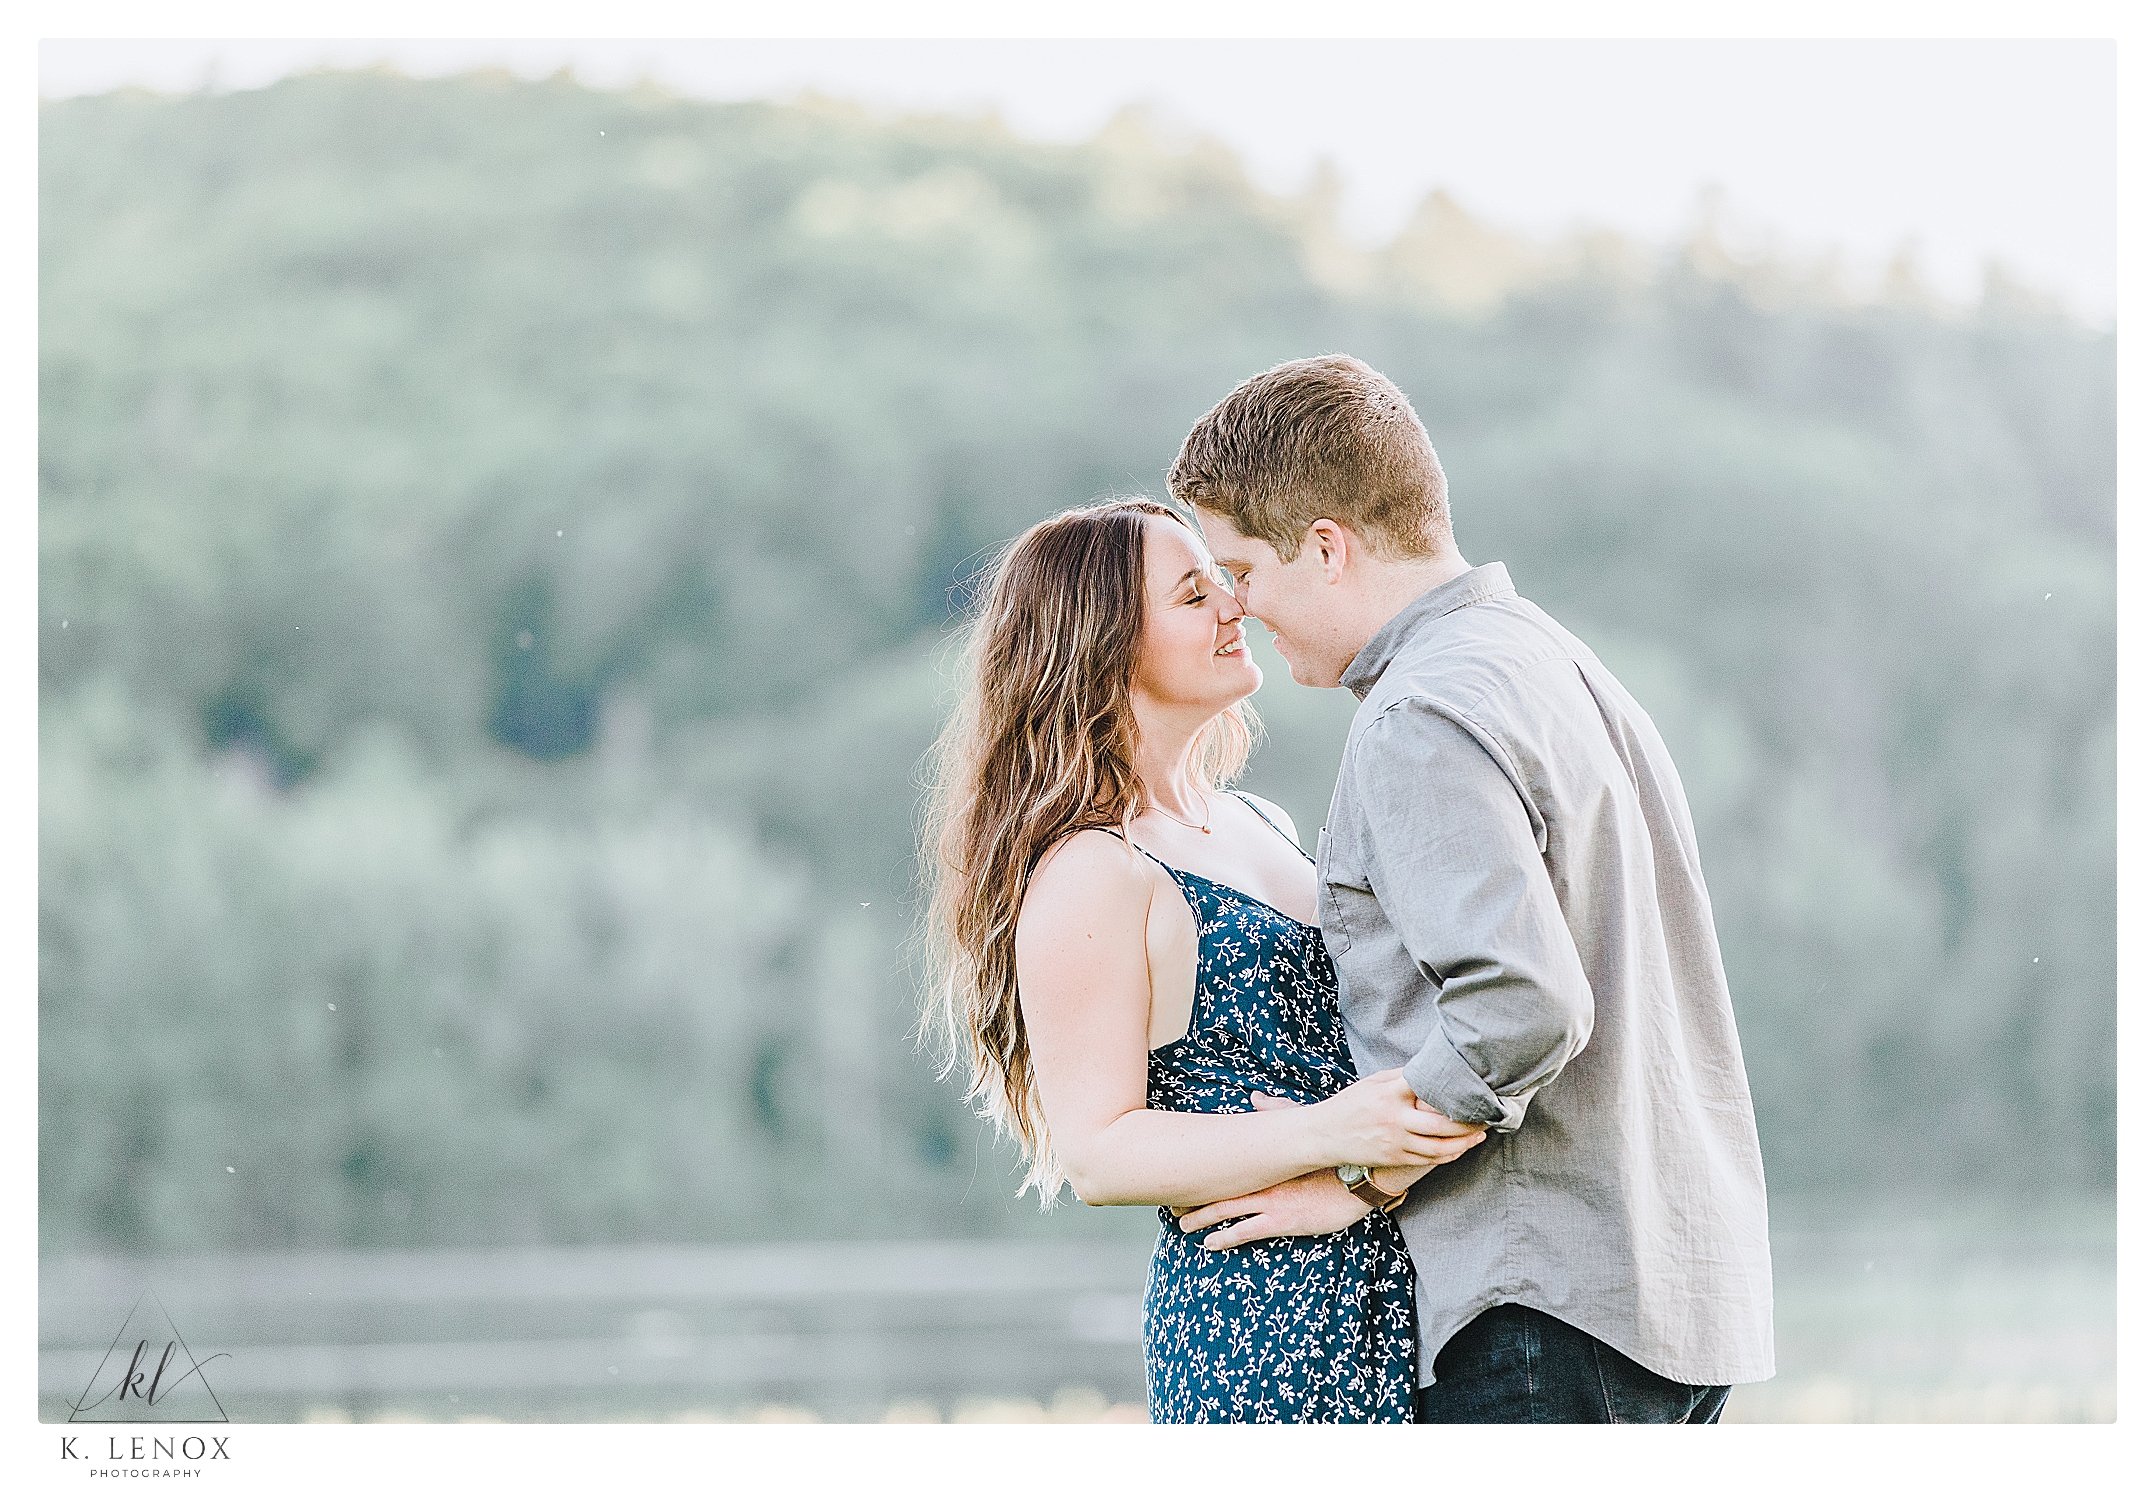 Outdoor Engagement session in Brattleboro VT.